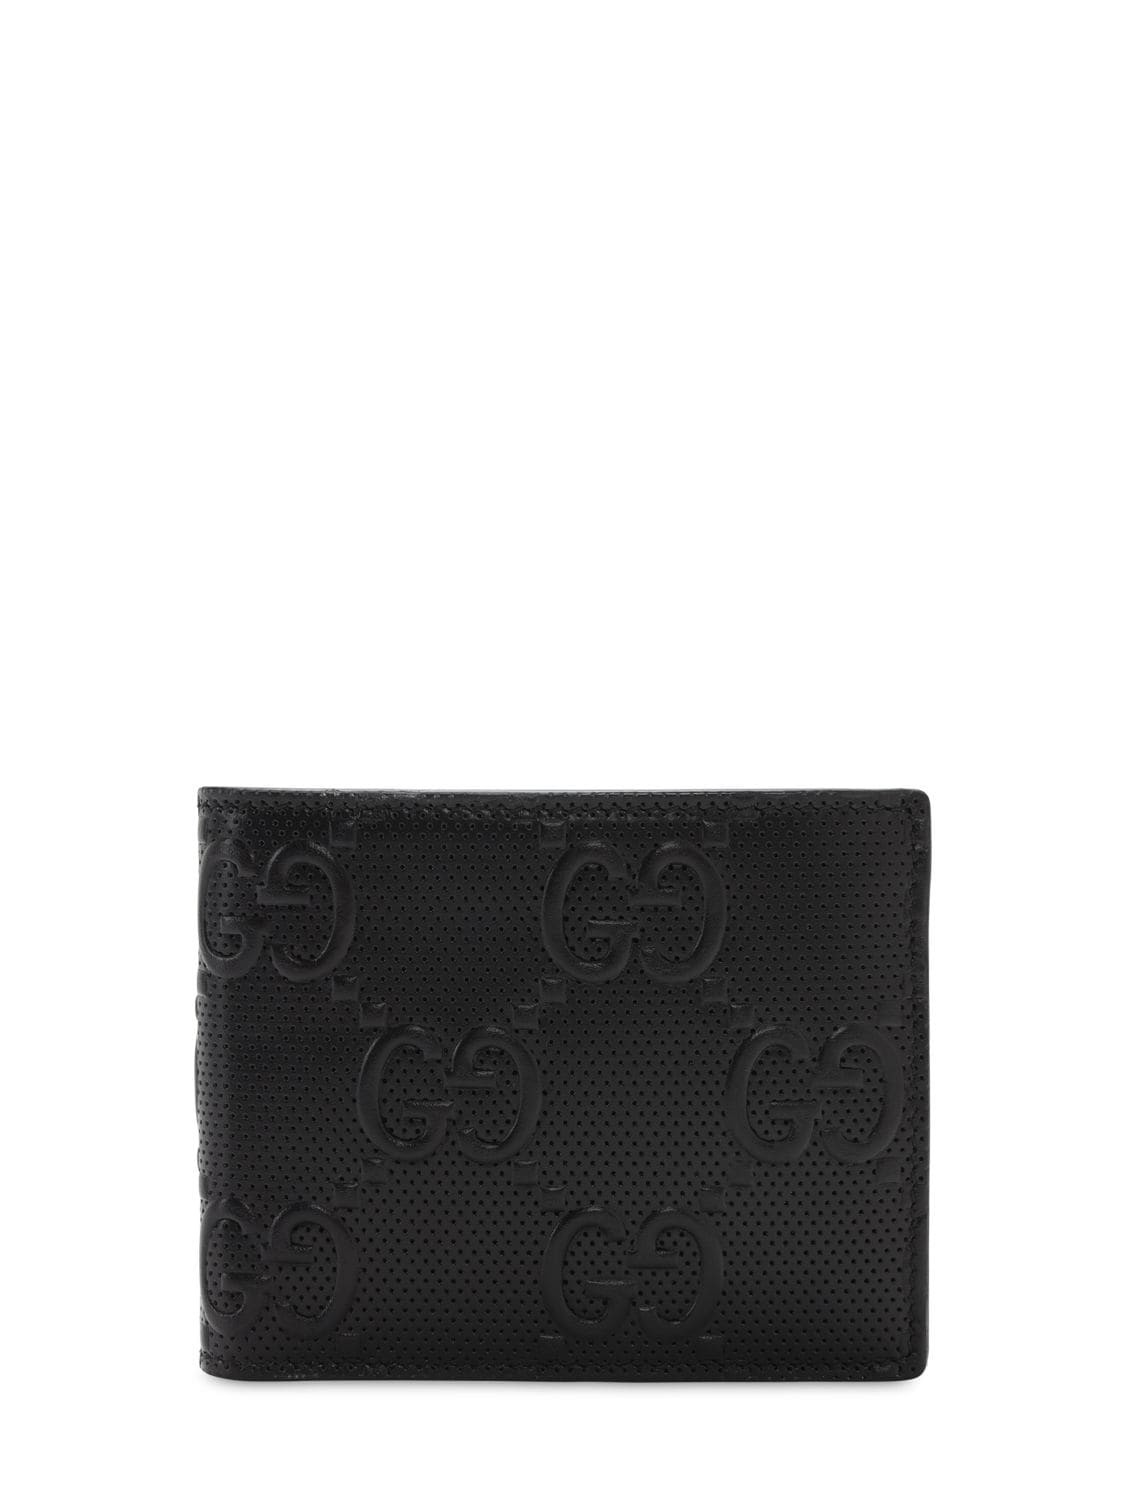 Gg Debossed Leather Wallet | The Fashionisto